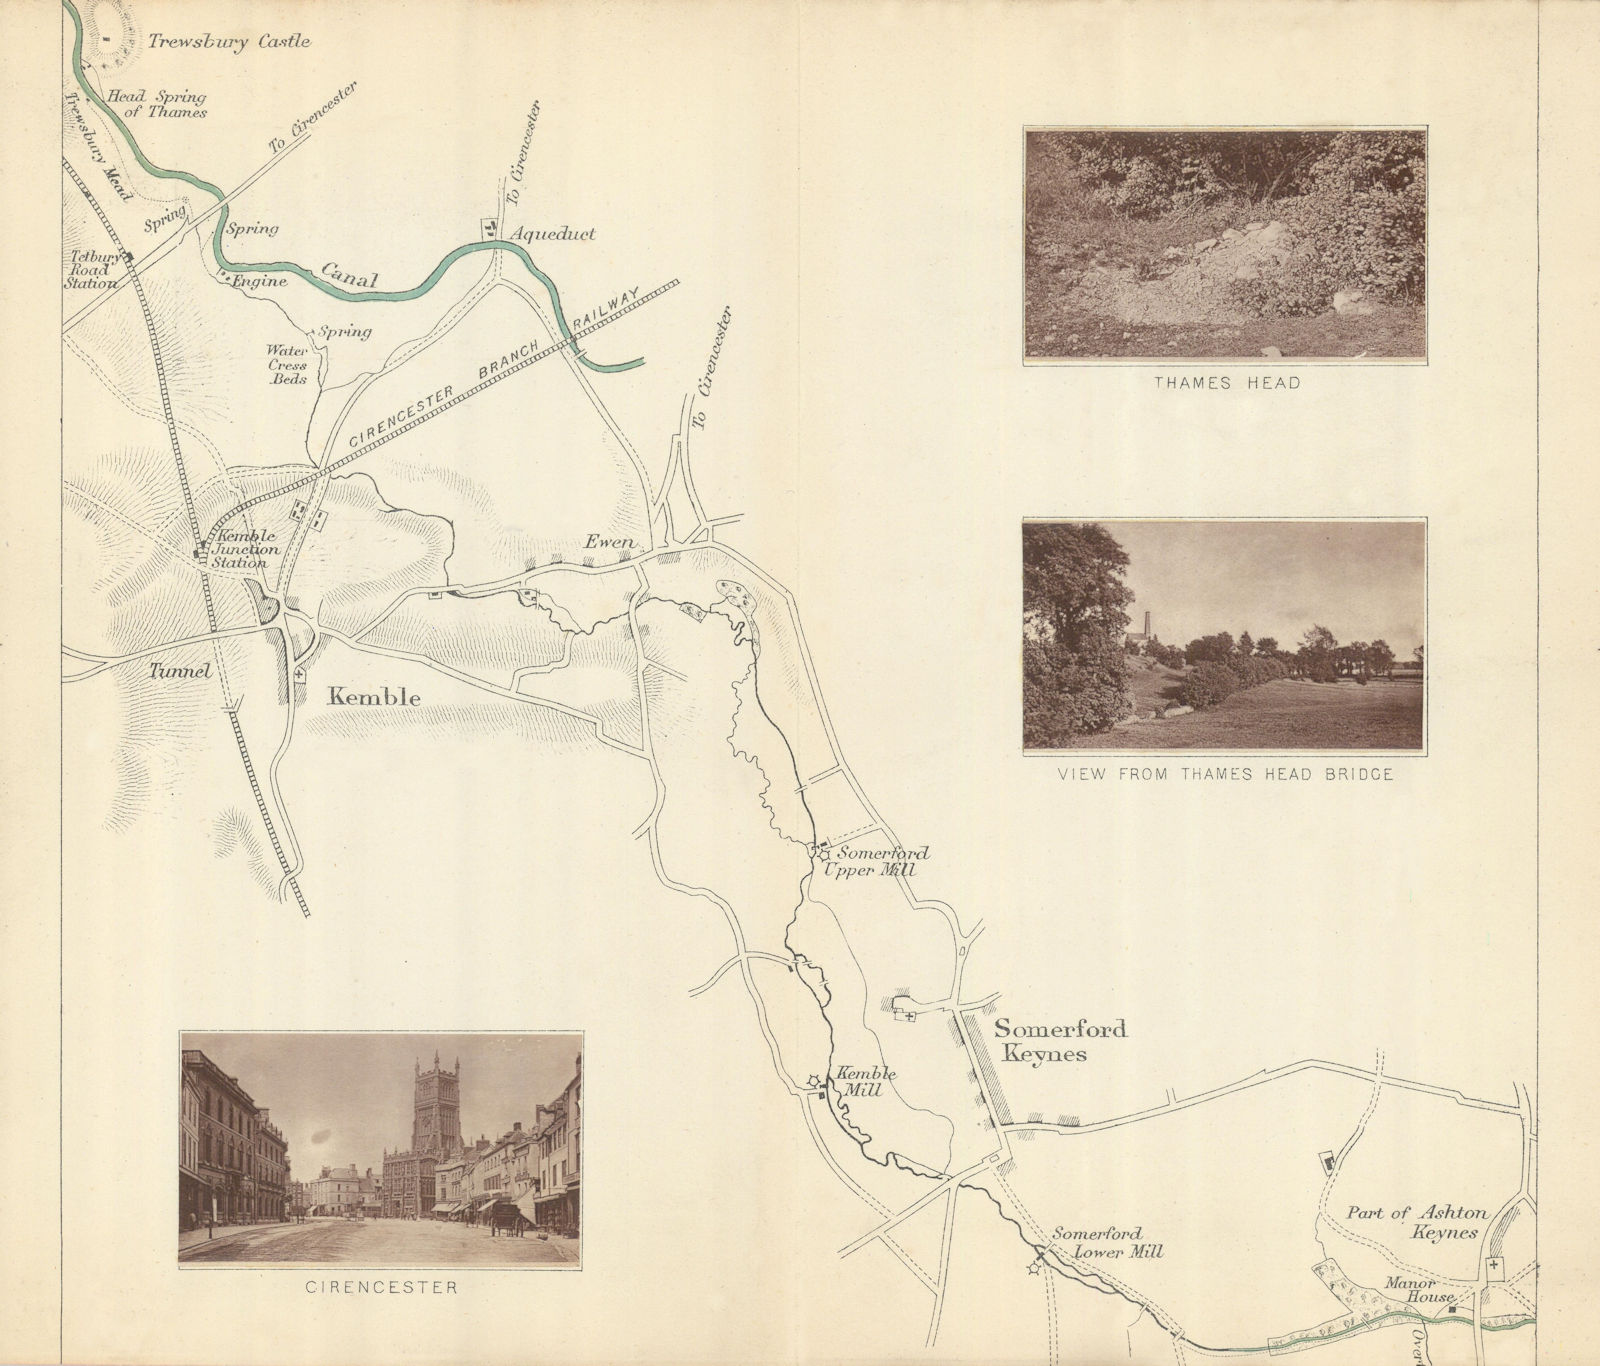 Associate Product RIVER THAMES HEAD - Kemble - Somerford Keynes. Cirencester. TAUNT 1879 old map